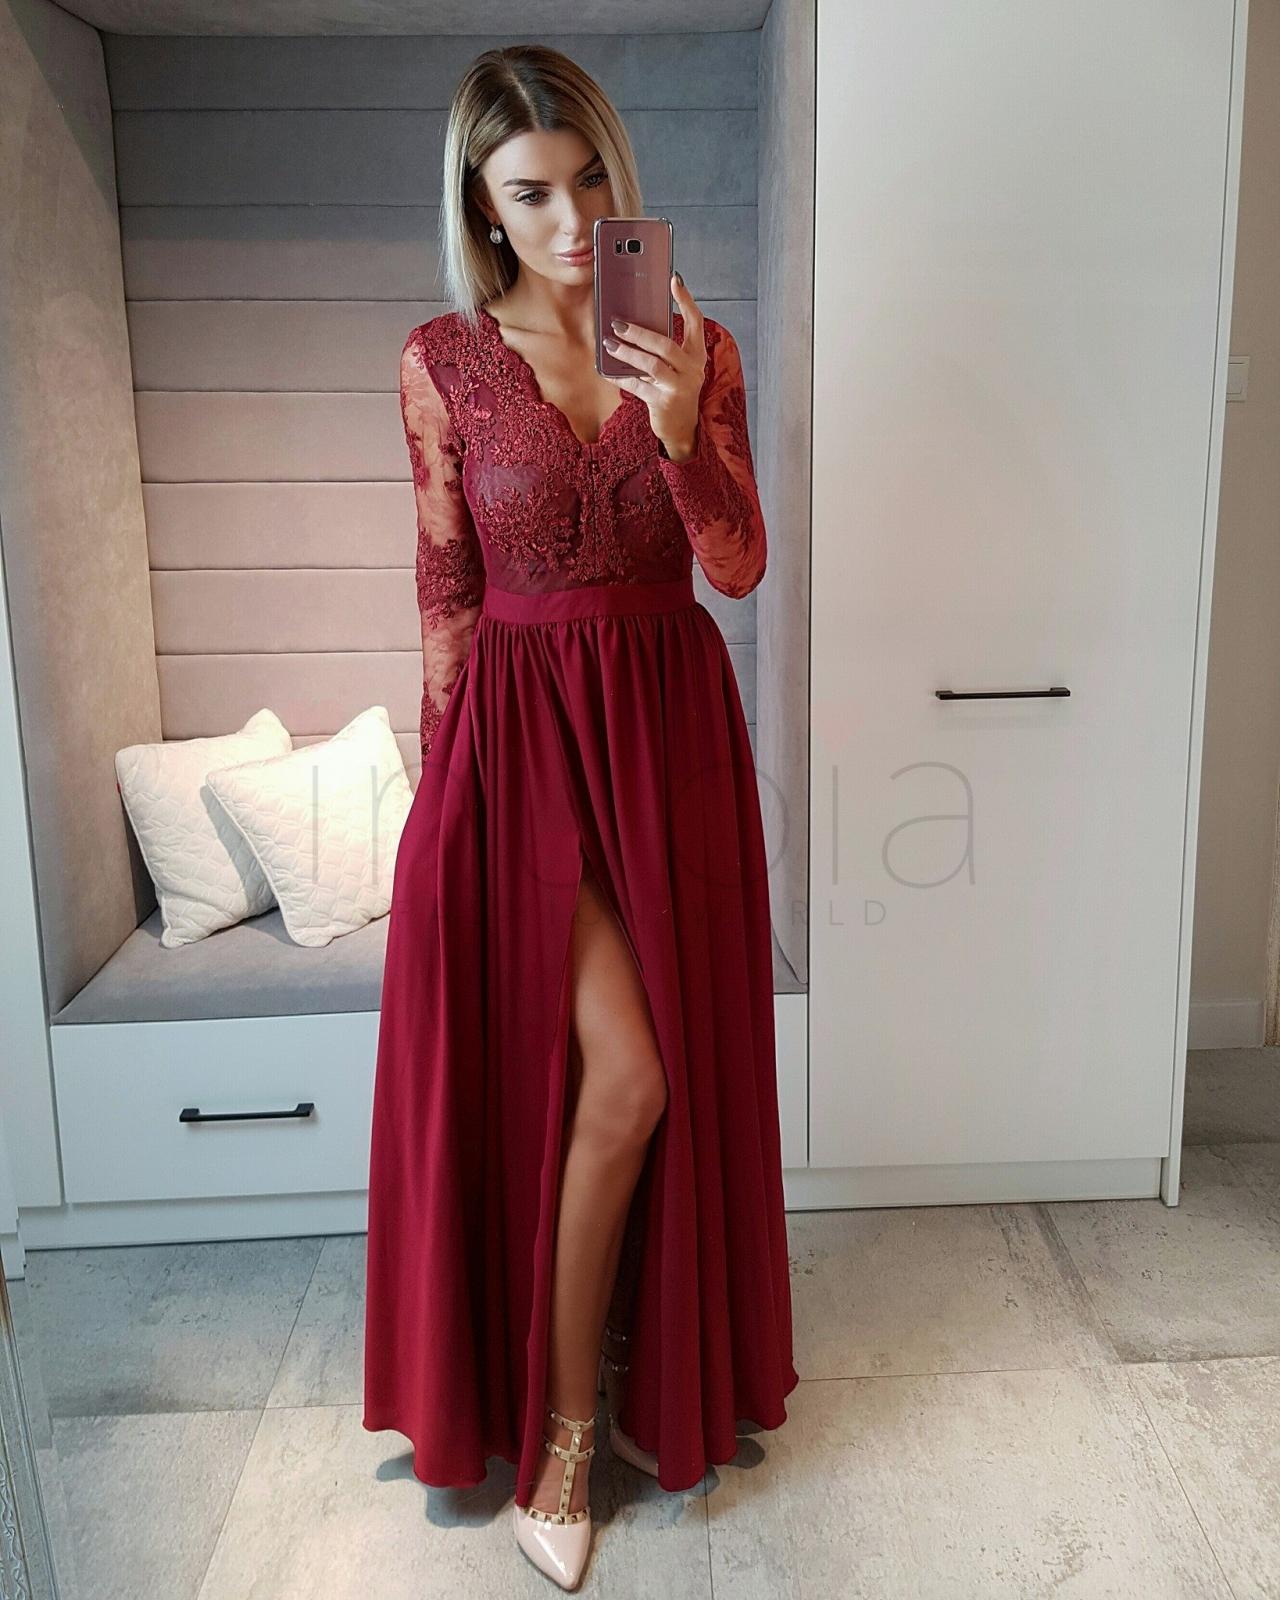 Long Sleeves Wine Red Prom Dress.formal Occasion Dress, Burgundy Prom Dresses, Blue Party Dresses, Evening Gowns